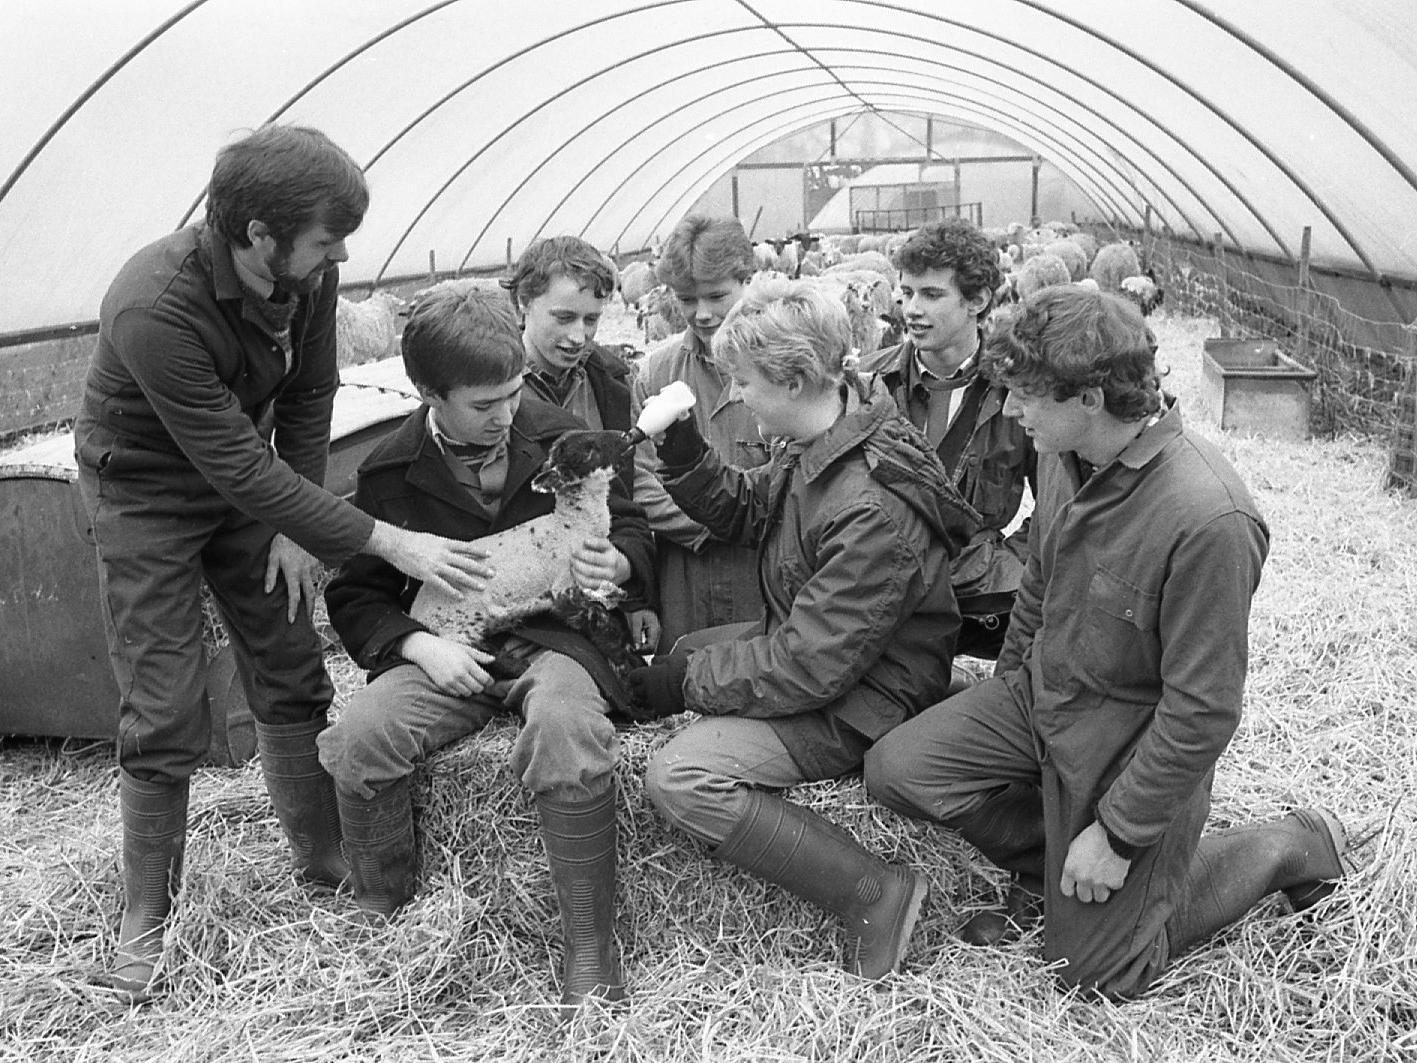 Students look on as lecturer Len Bagley directs Ann-Louise Painter and David Sumner in holding and bottle feeding lambs at the Lancashire College of Agriculture and Horticulture